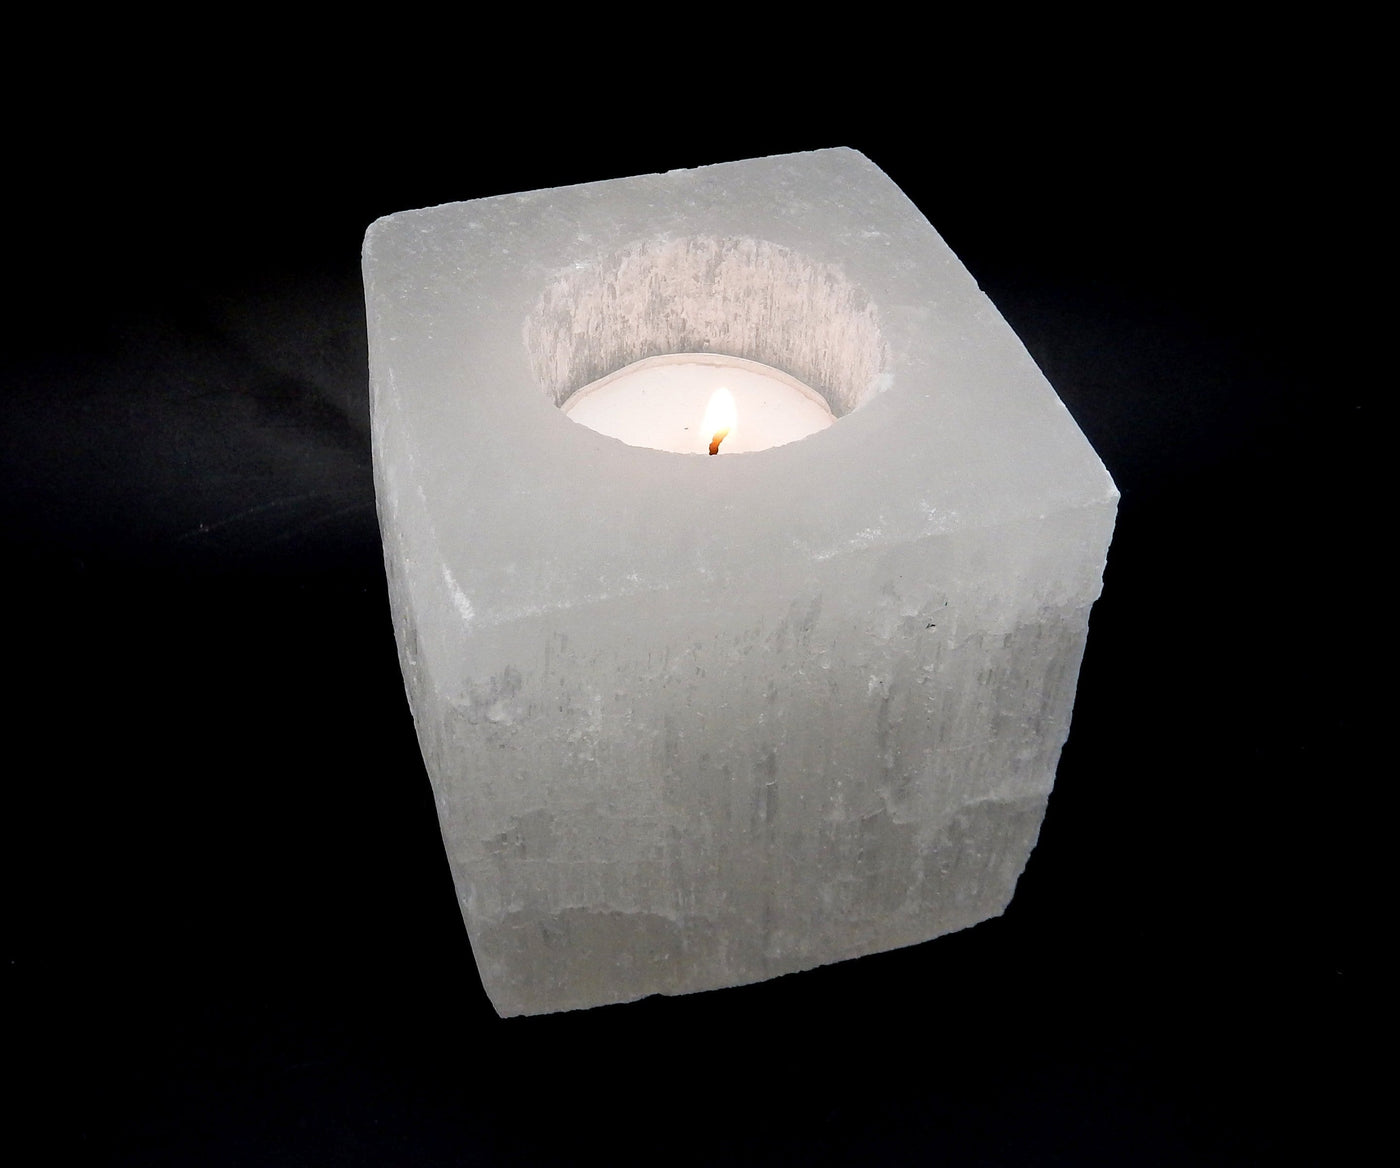 SIngle Square Shaped Selenite Candle Holder on a black background with a lit candle inside (candle not included)